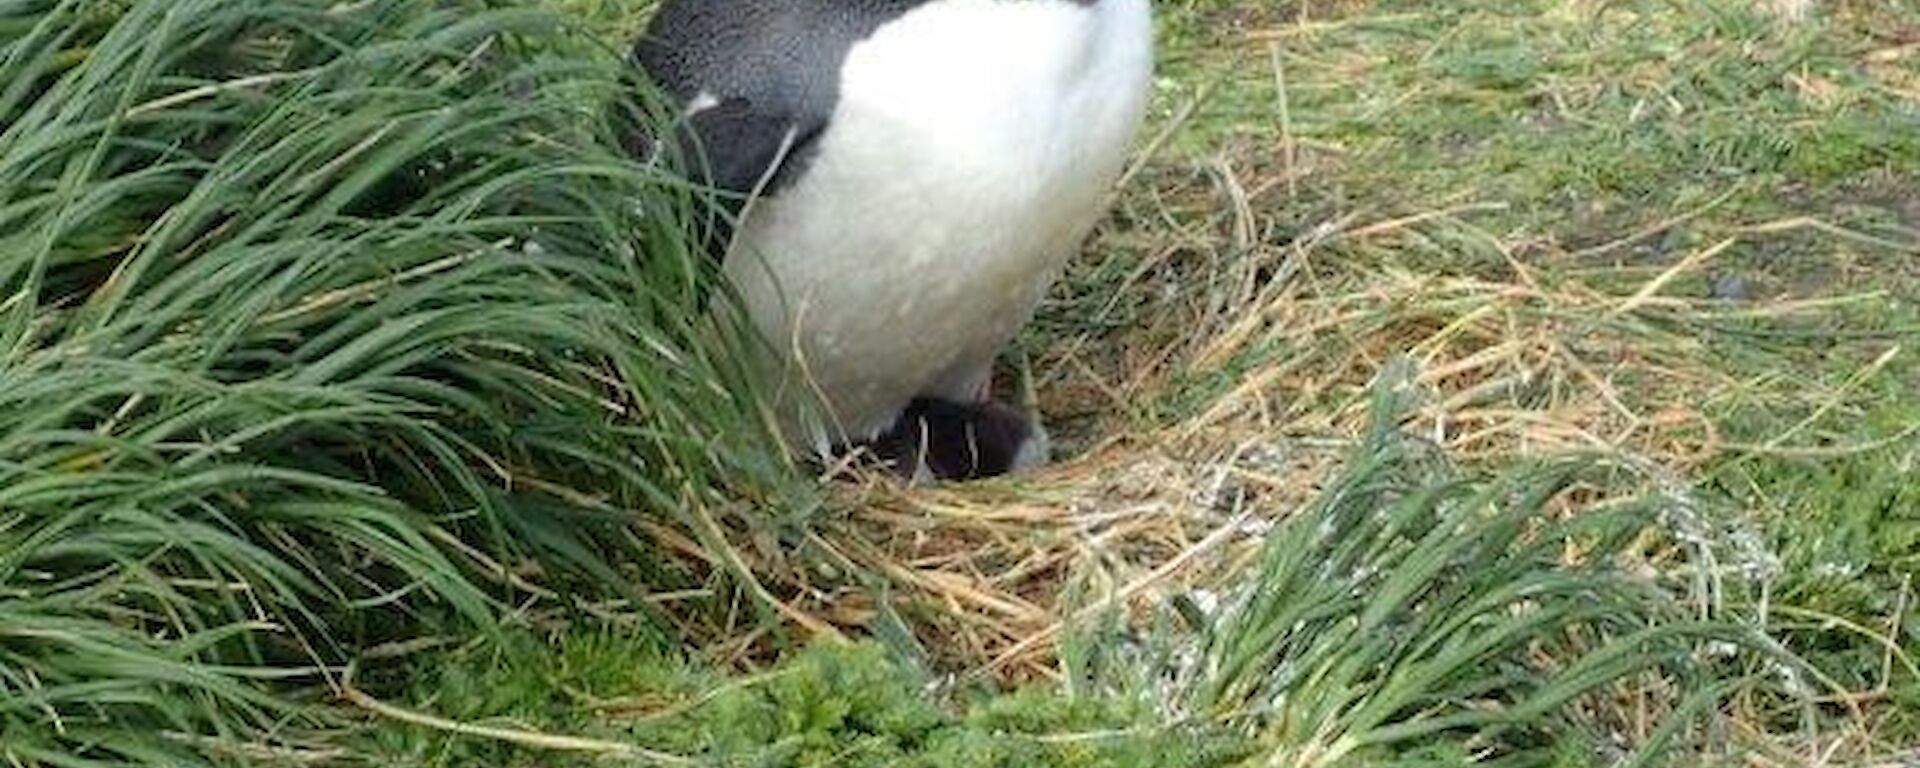 A gentoo penguin sitting on chicks just in view in the vegetation